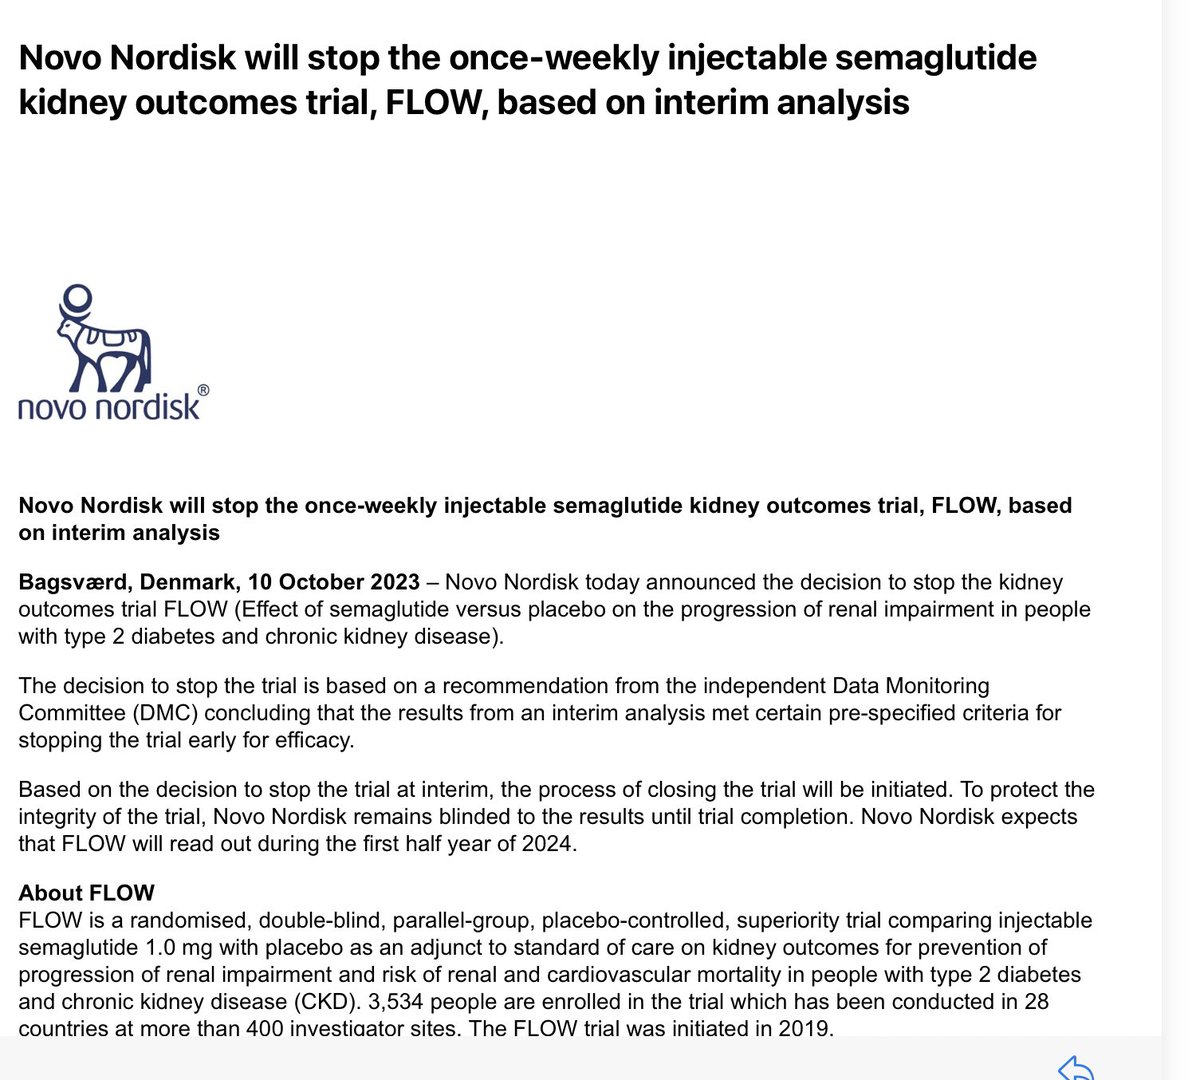 Another huge win for GLP-1, semaglutide and PPL with #T2D at risk of developing #kidney disease. FLOW stopped early for efficacy @novonordisk novonordisk.com/content/nncorp…